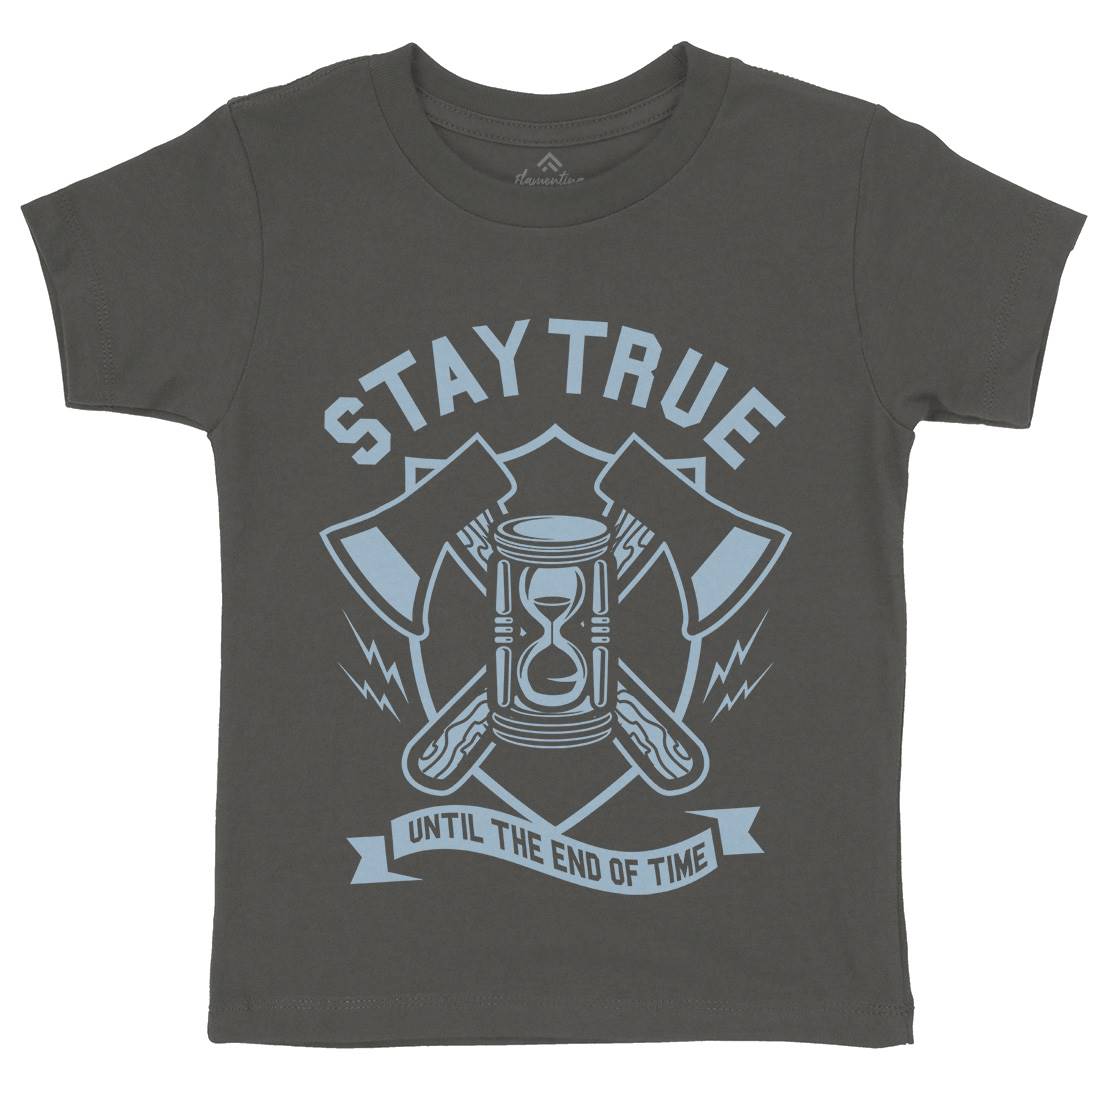 Stay True Kids Organic Crew Neck T-Shirt Quotes A285